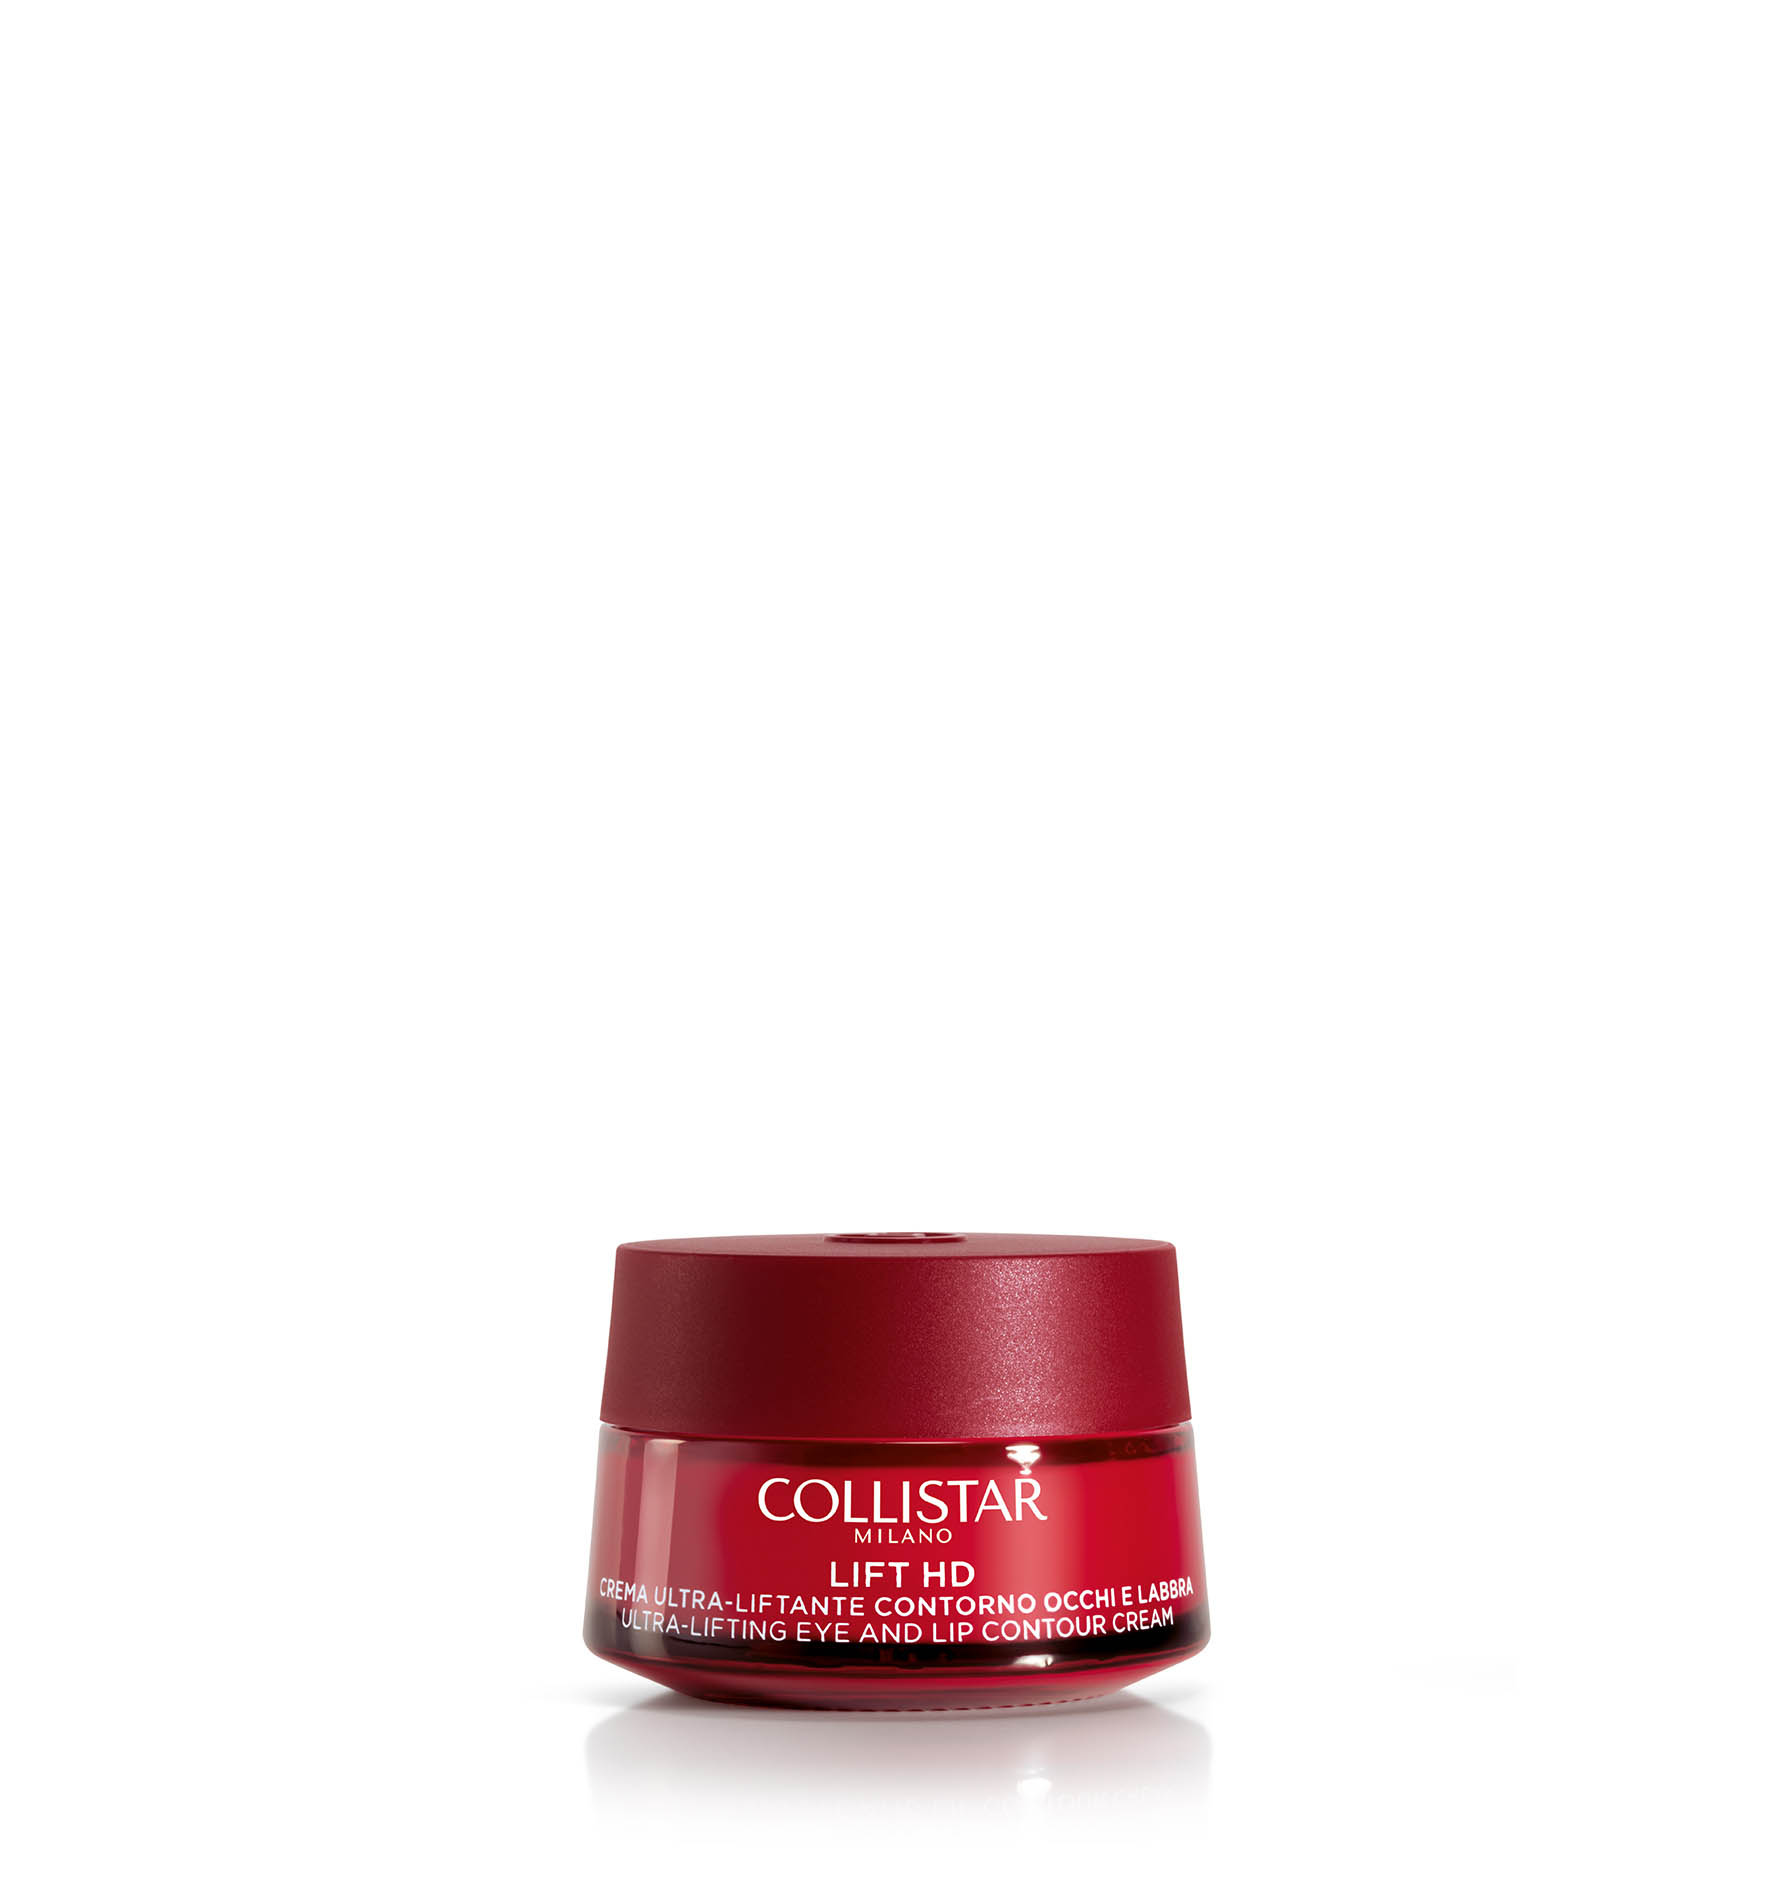 ULTRA-LIFTING EYE AND LIP CONTOUR CREAM - Anti-age | Collistar - Shop Online Ufficiale